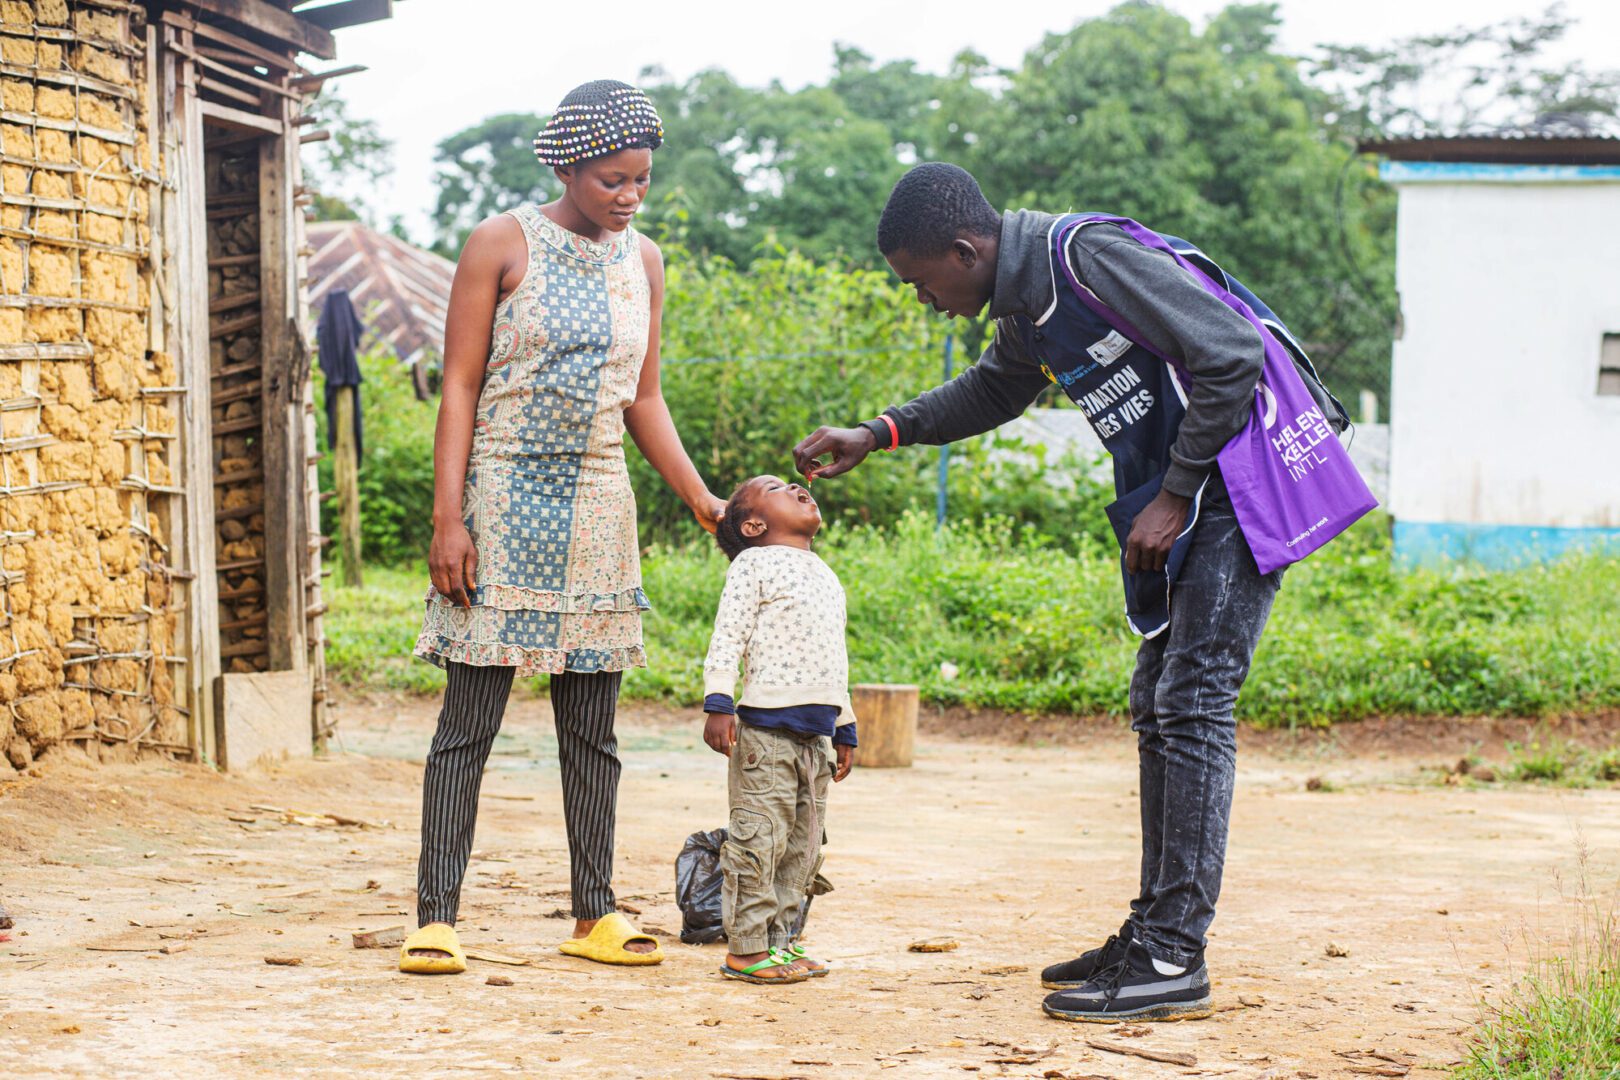 A community health worker in Cameroon gives a young boy a dose of vitamin A as his mother watches.